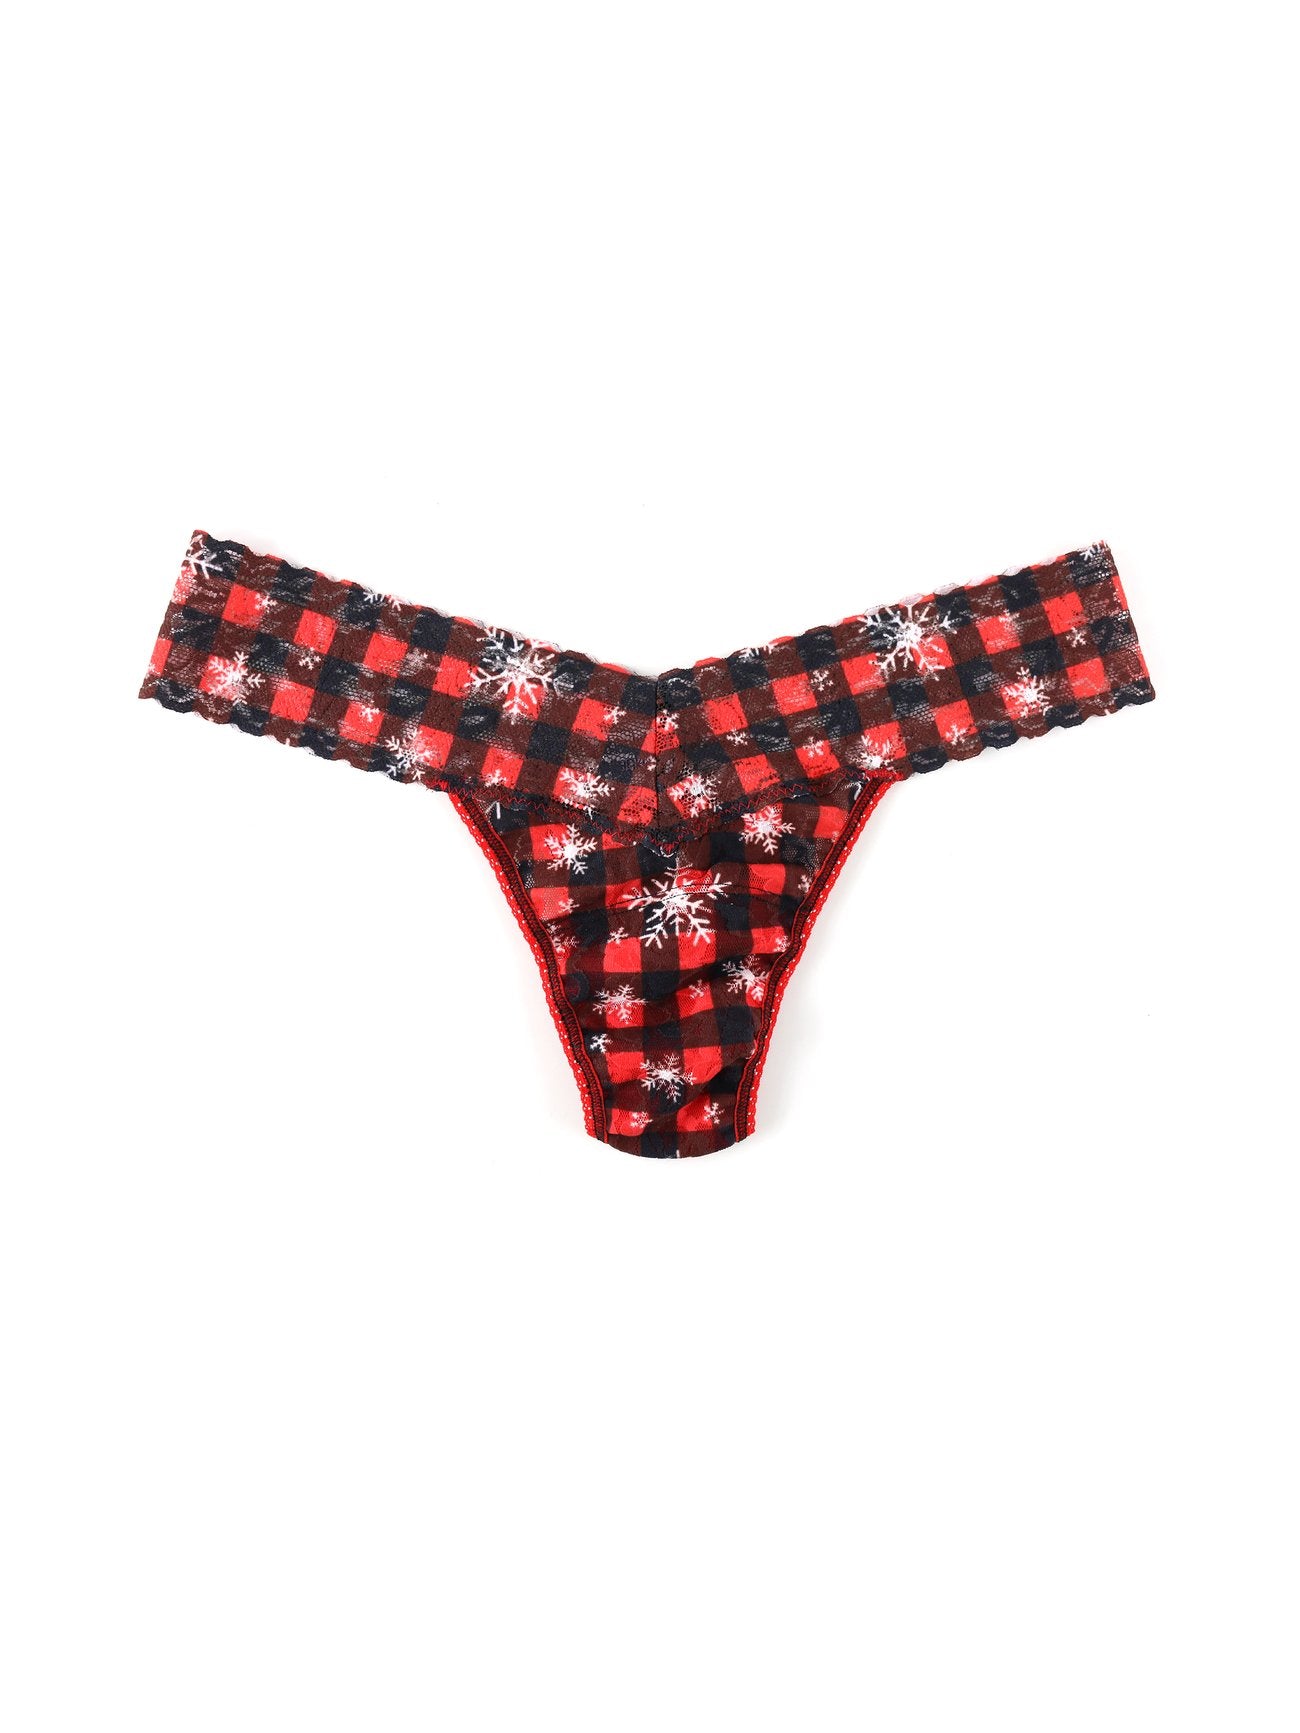 Hanky Panky Home for the Holidays Thong